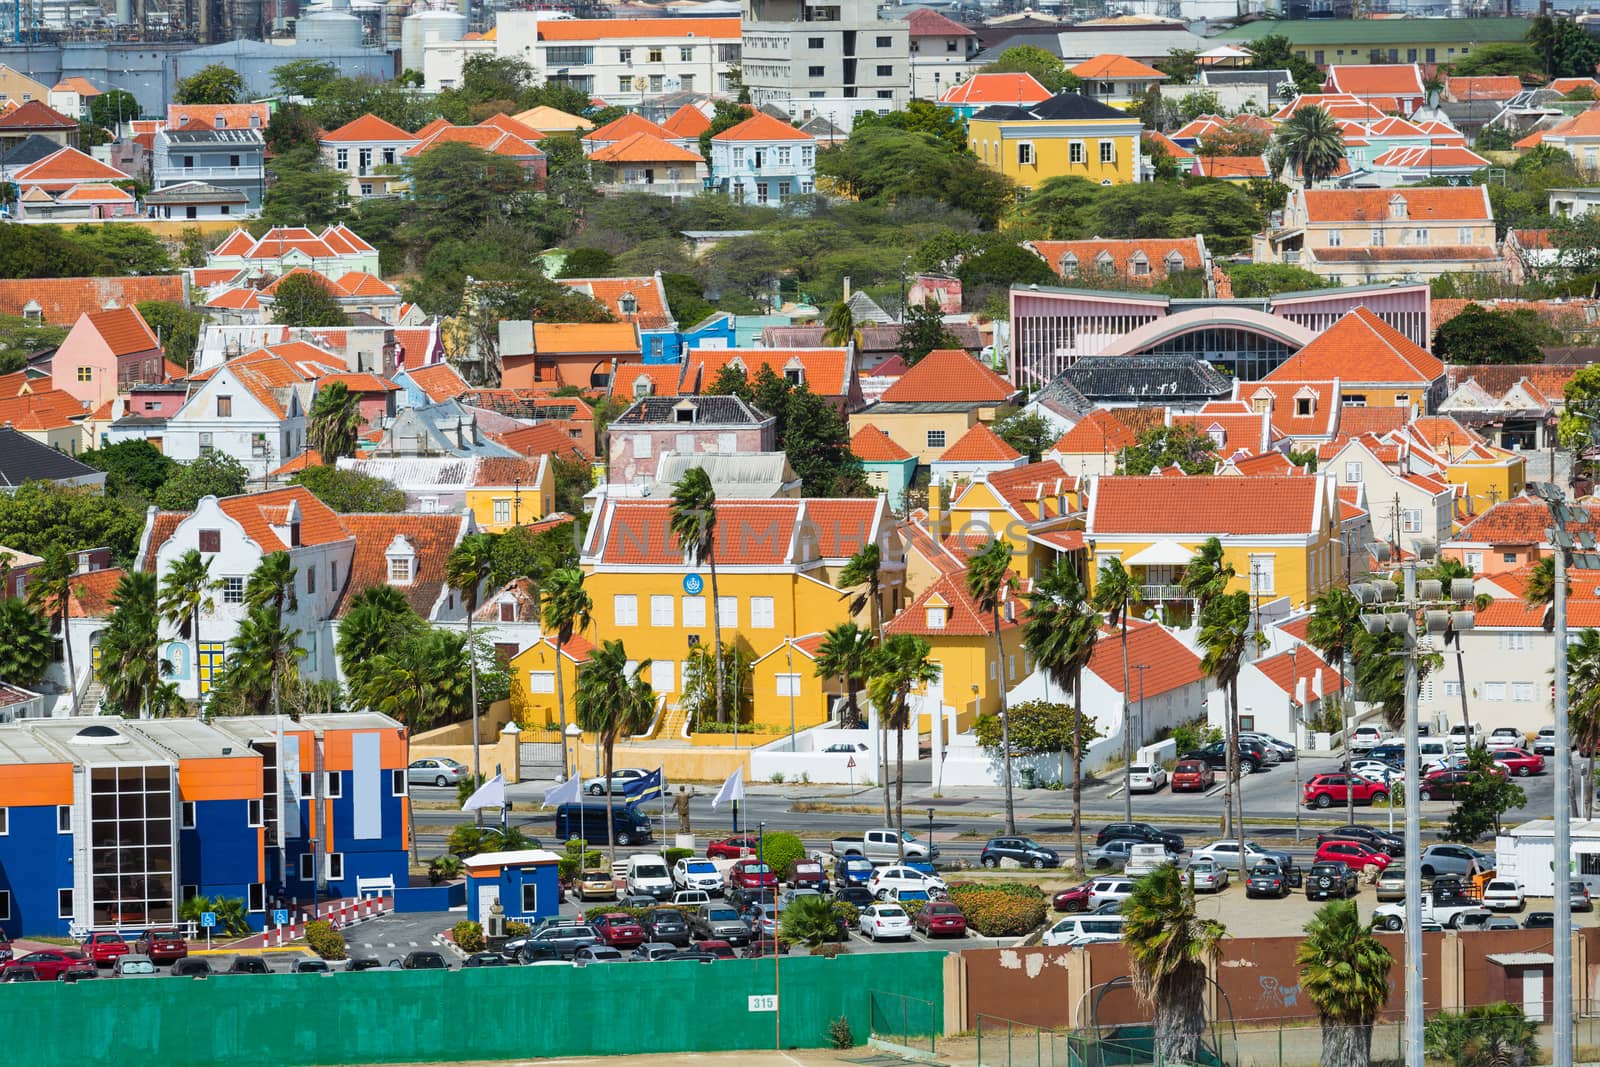 Typical residences and homes in Curacao by chrisukphoto